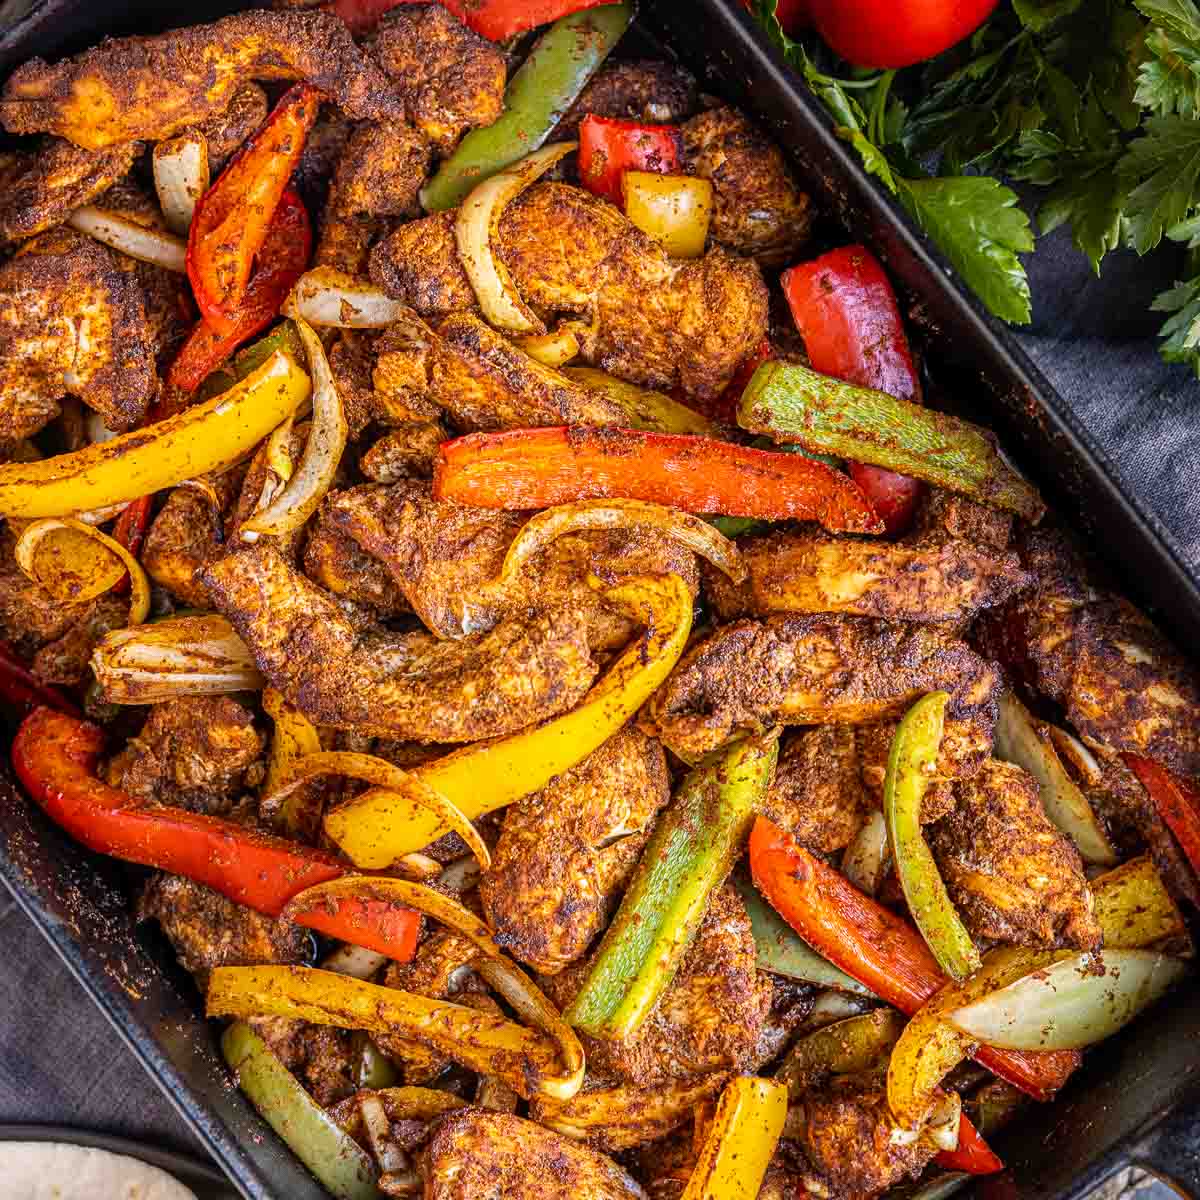 Oven Chicken Fajitas in less than 30 minutes